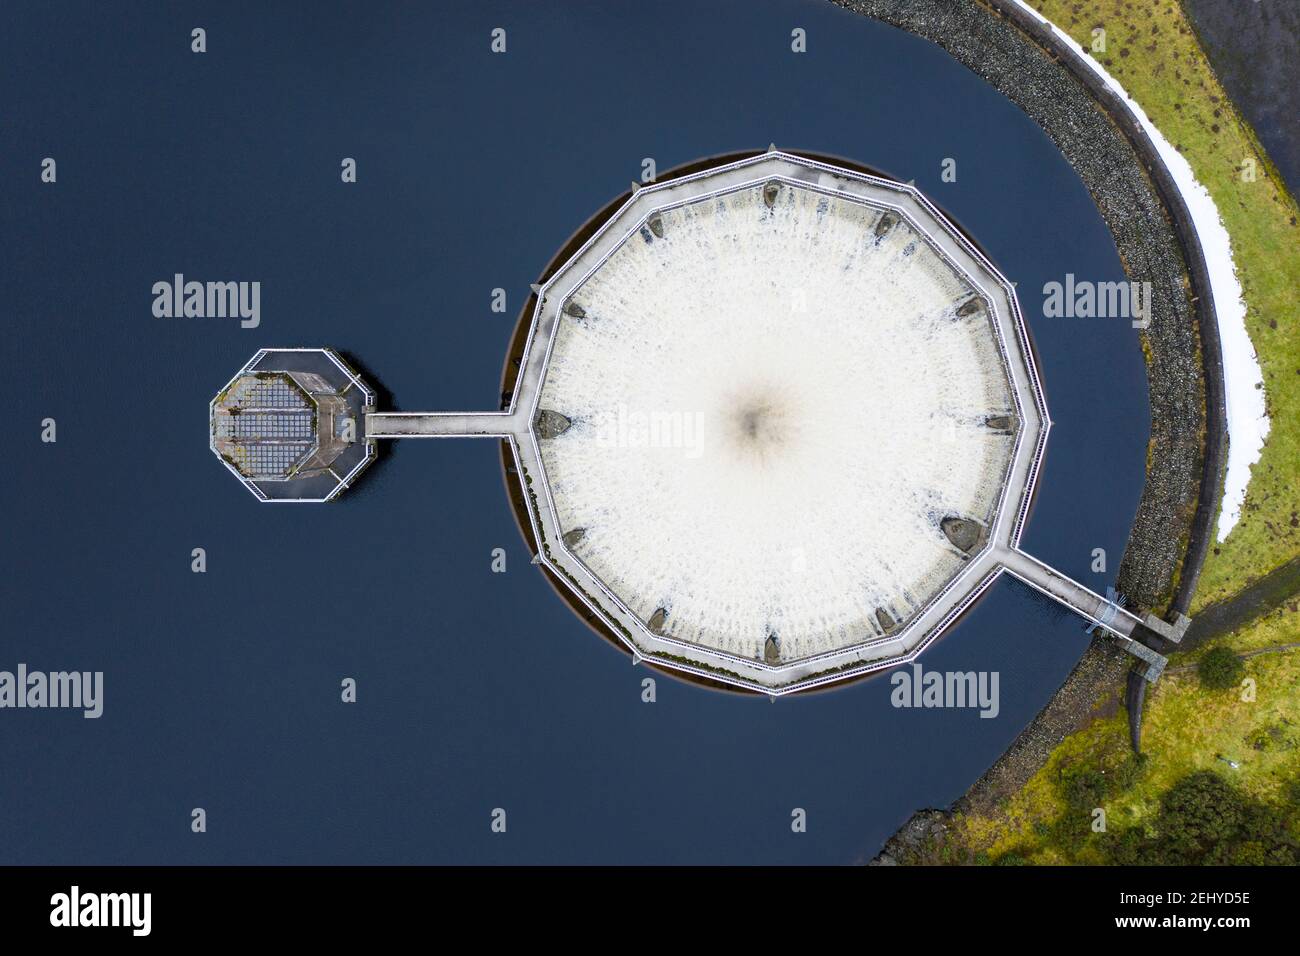 East Lothian, Scotland, UK. 20 Feb 2021. Meltwater from recent snow and heavy rain has filled Scottish reservoirs to capacity. Dam spillways are now full whilst discharging water downstream. Pic; Drone image of circular siphon spillway at Whiteadder Dam running at full capacity to discharge water from the reservoir. Iain Masterton/Alamy Live News Stock Photo